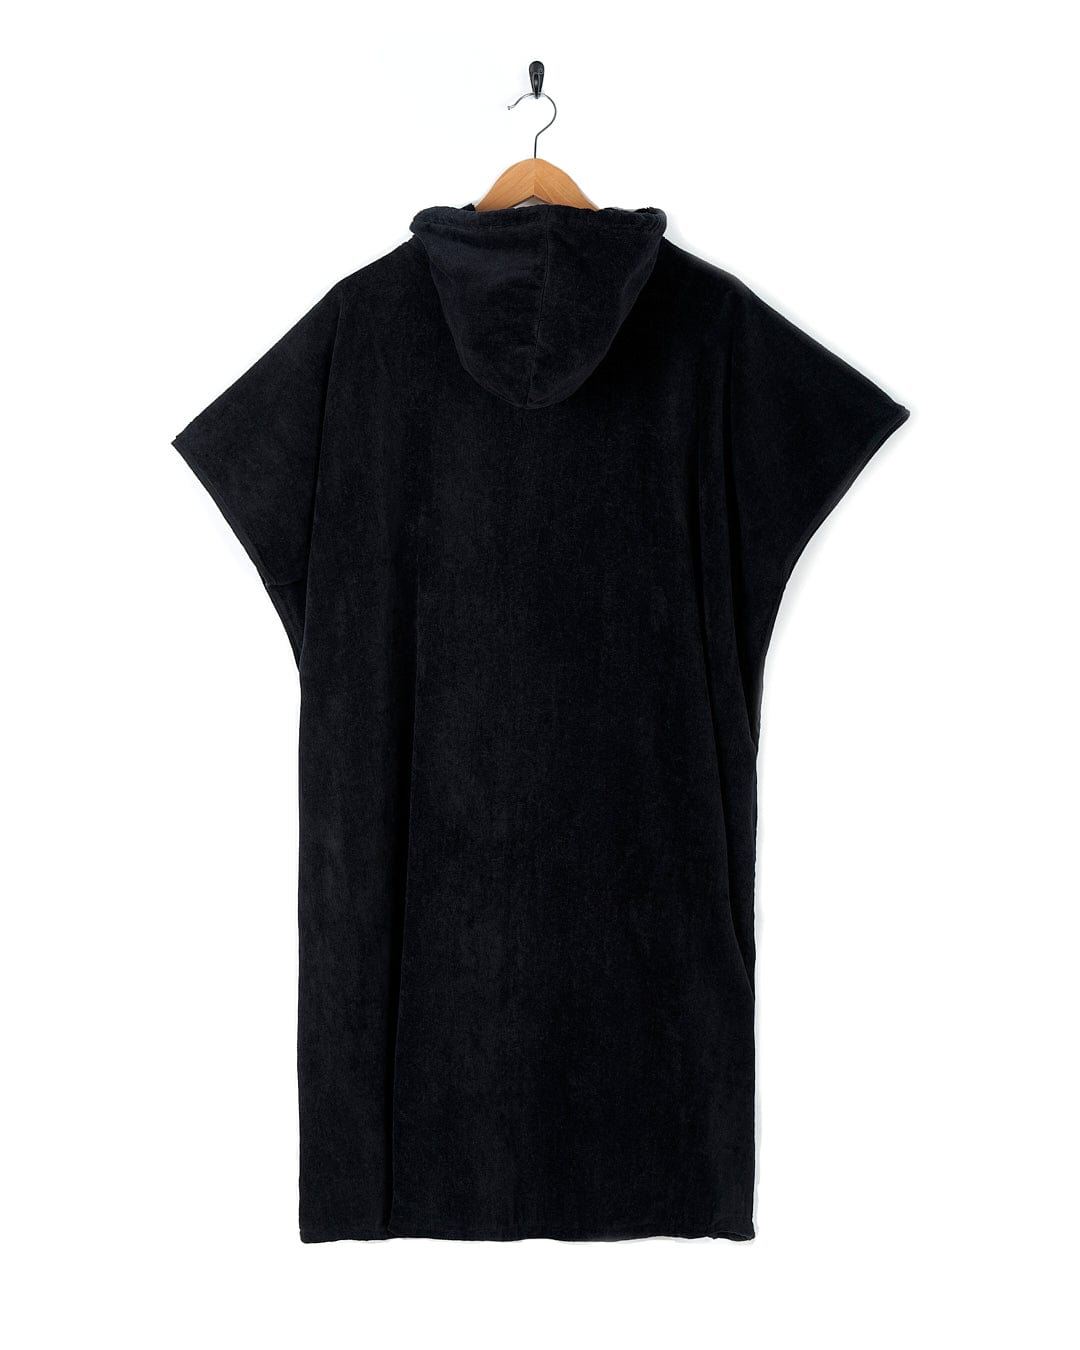 A Saltrock Corp - Changing Towel - Black/Red hooded towel hanging on a hanger.